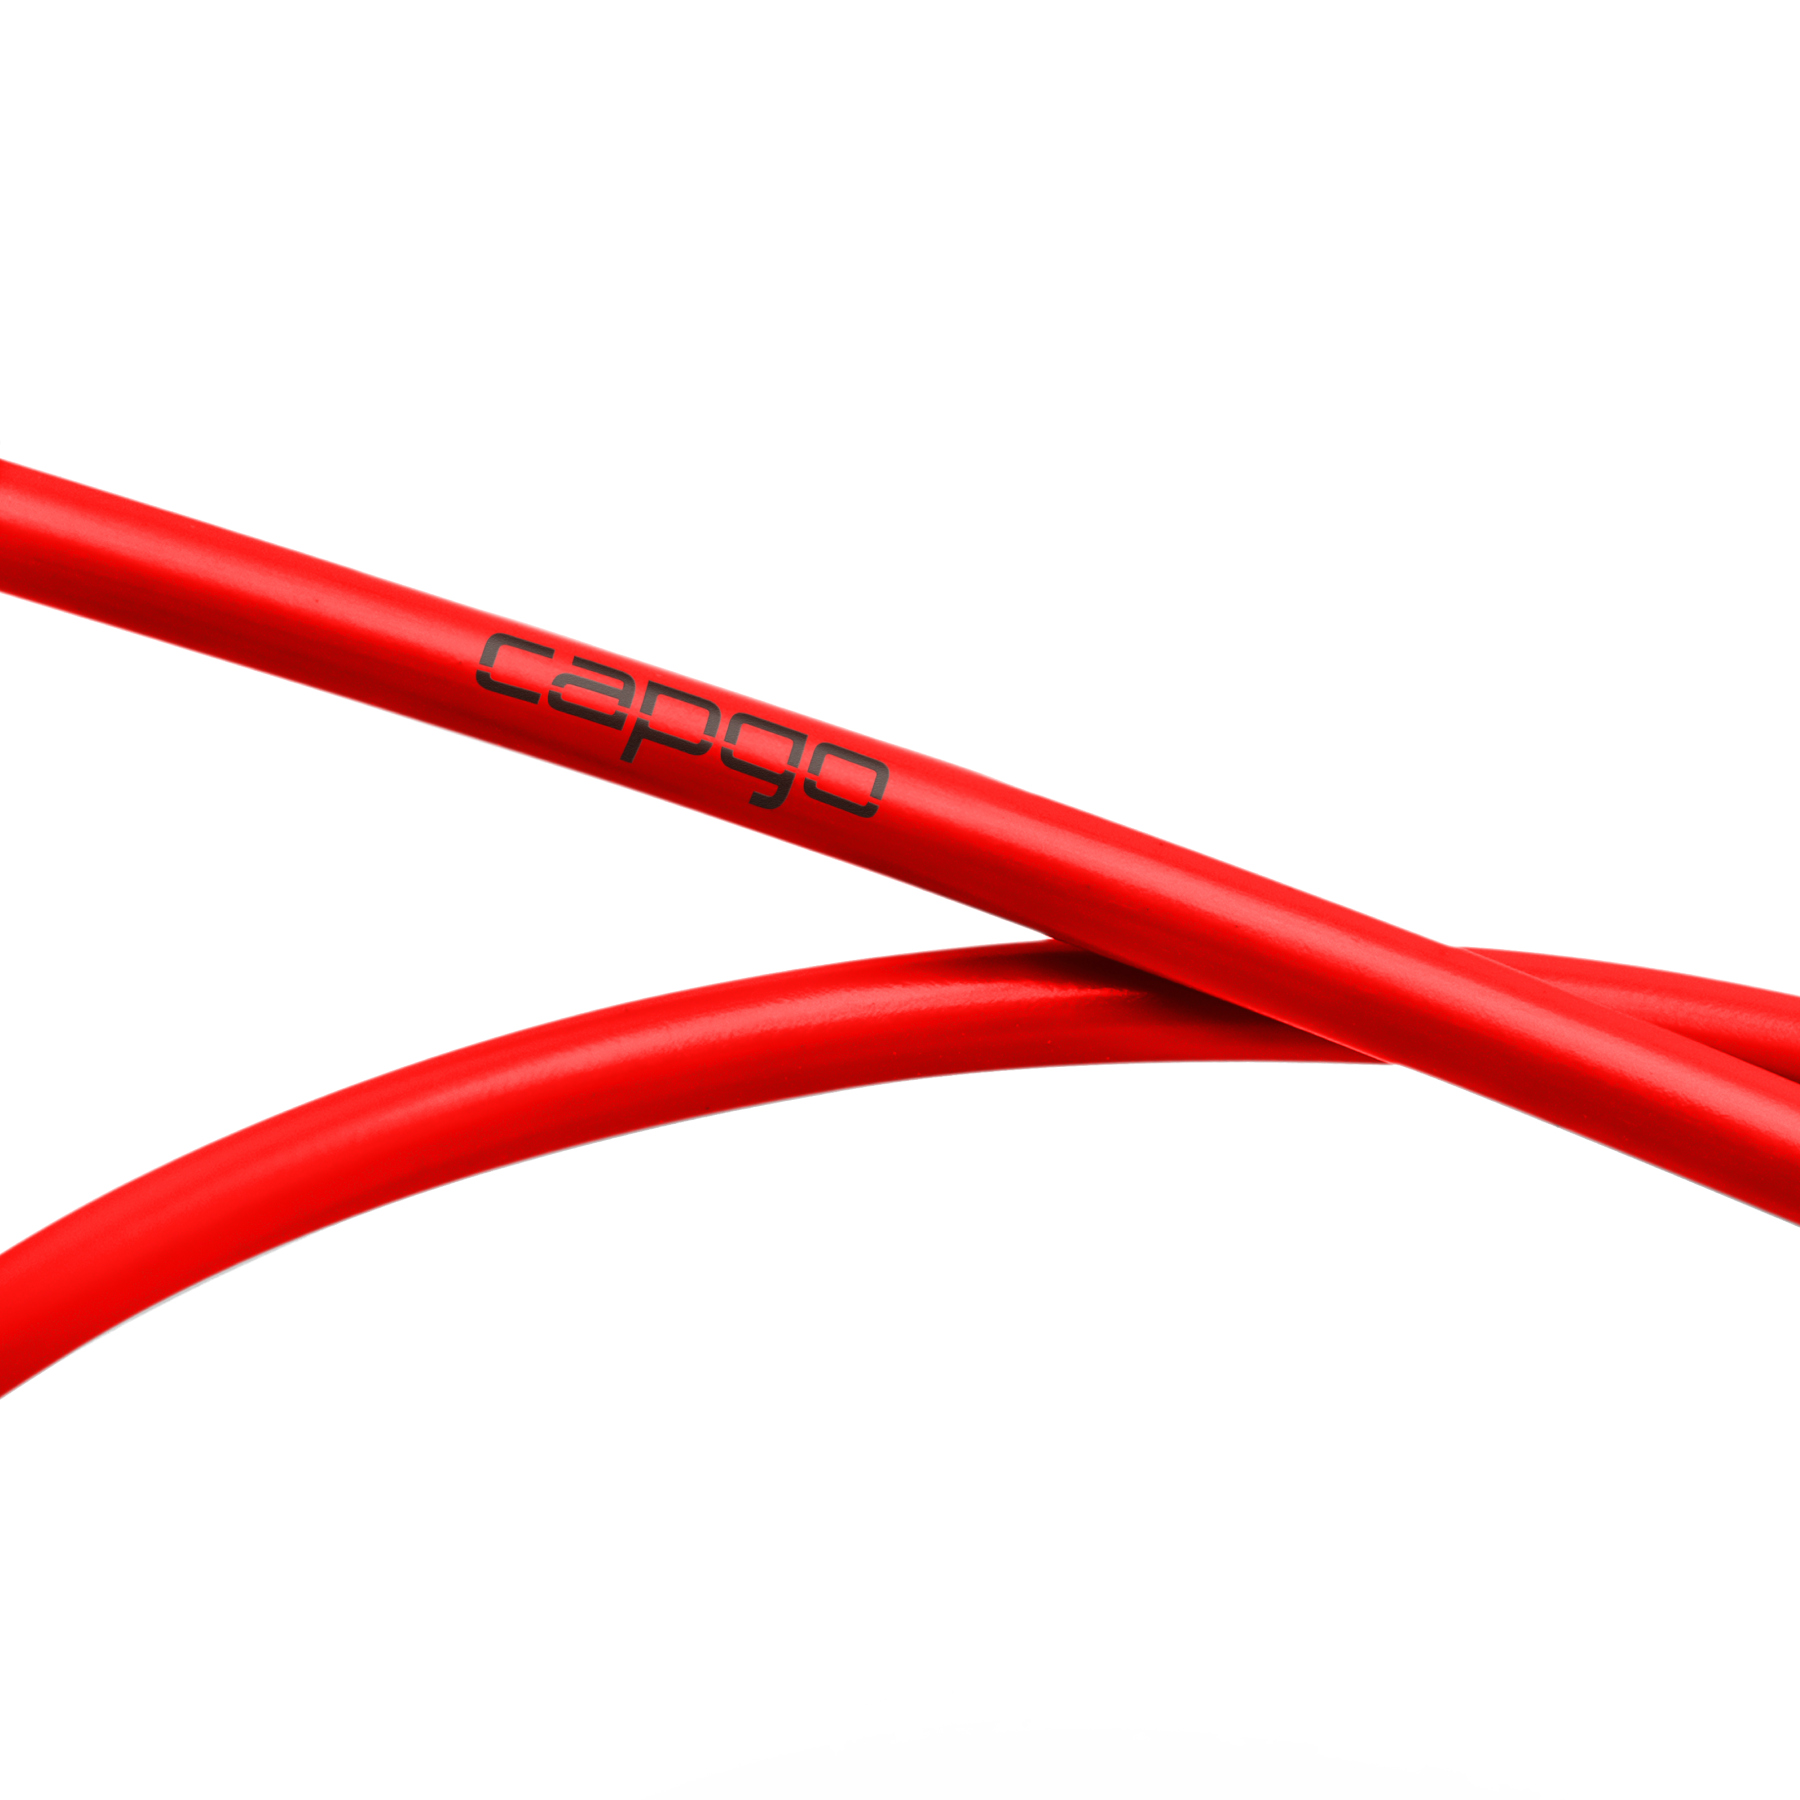 Image of capgo Blue Line Shift Cable Housing - 4 mm - PTFE - 3000 mm - red